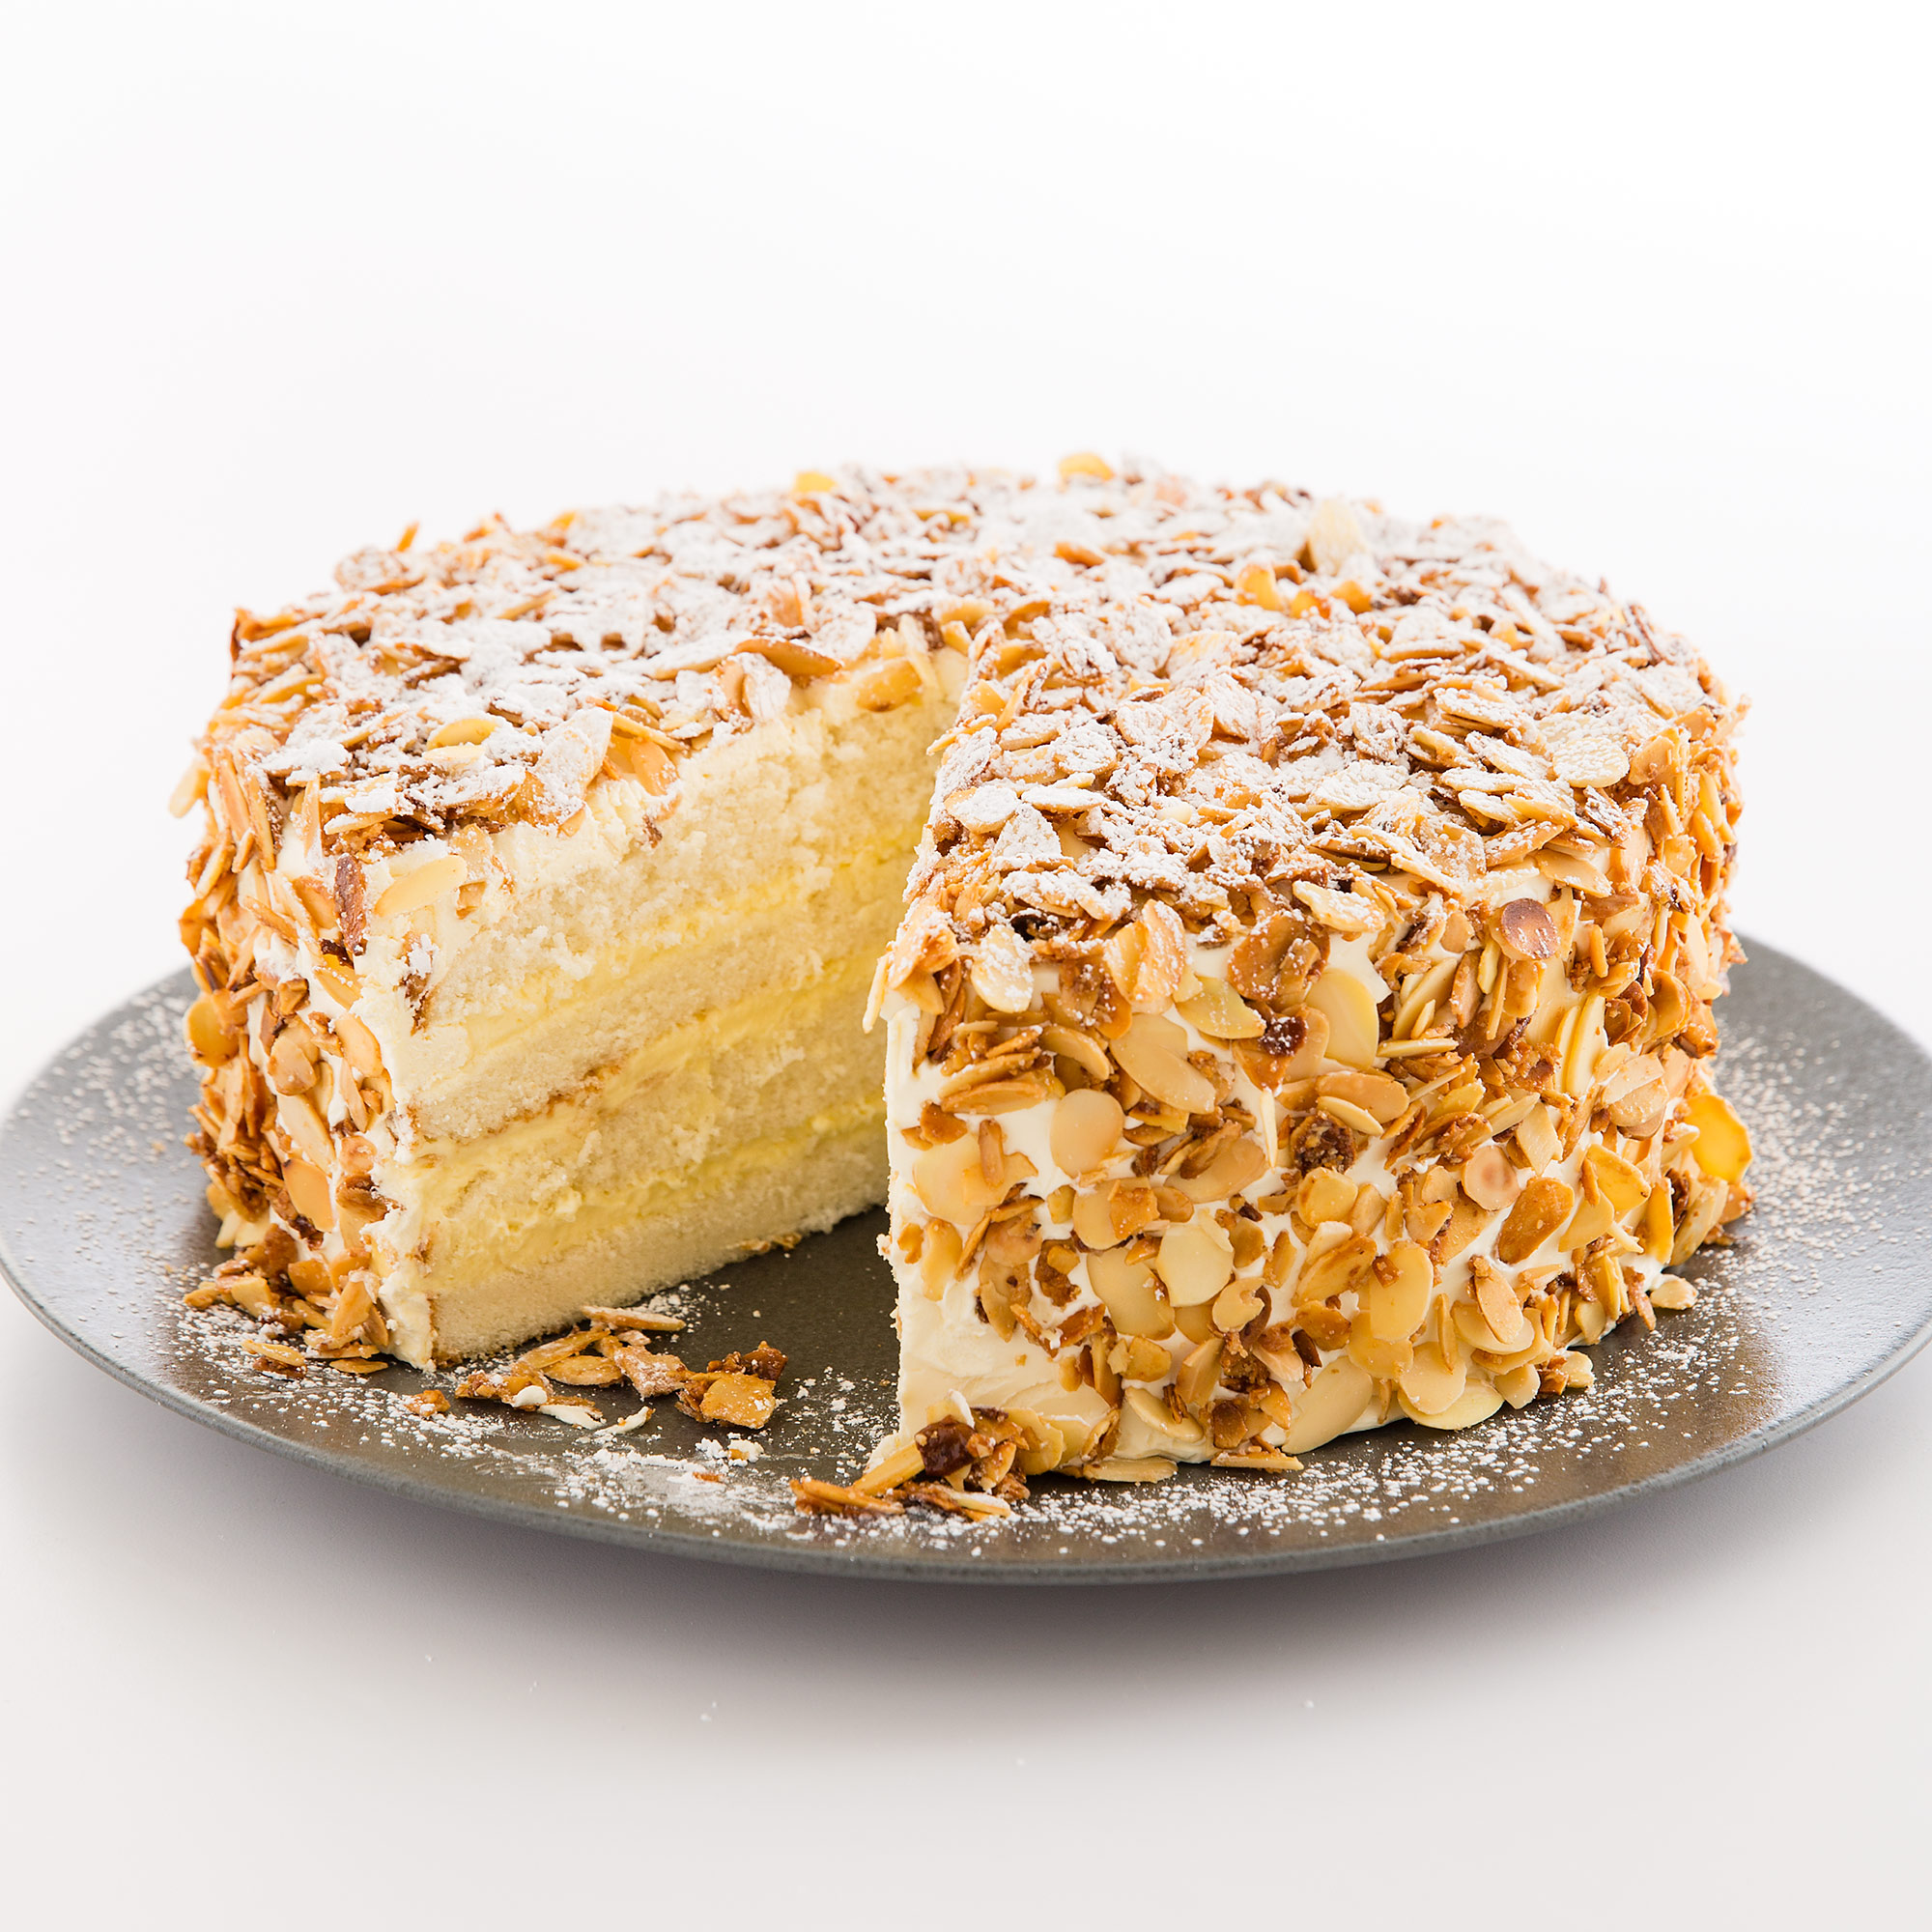 Prantl's Bakery adds pina colada to famous burnt almond torte family |  TribLIVE.com